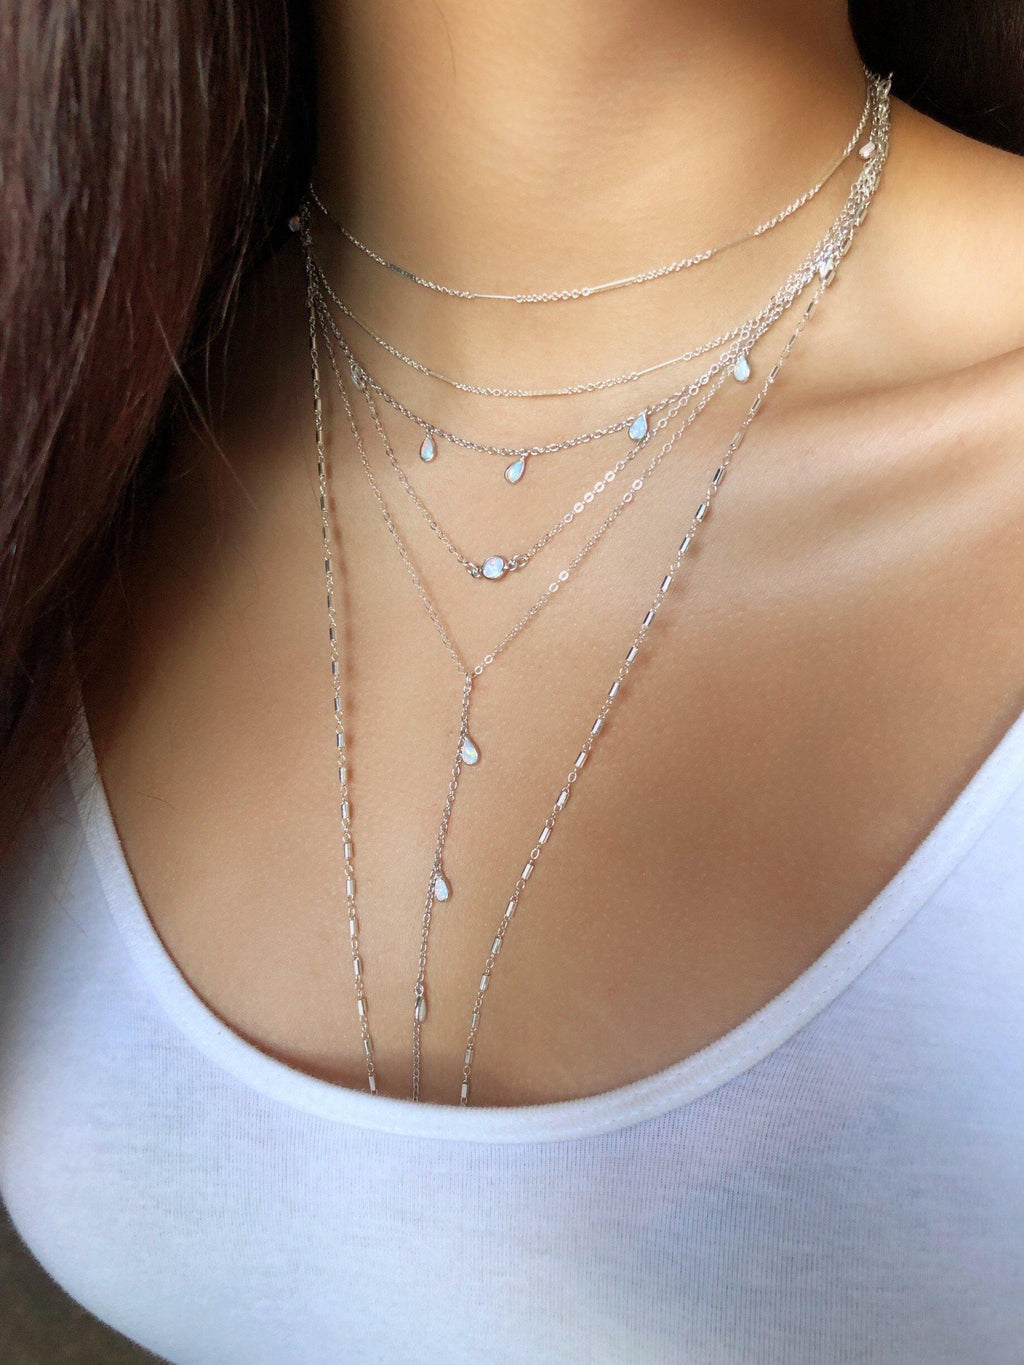 White Opal Choker in Silver-Necklaces-Waffles & Honey Jewelry-Waffles & Honey Jewelry